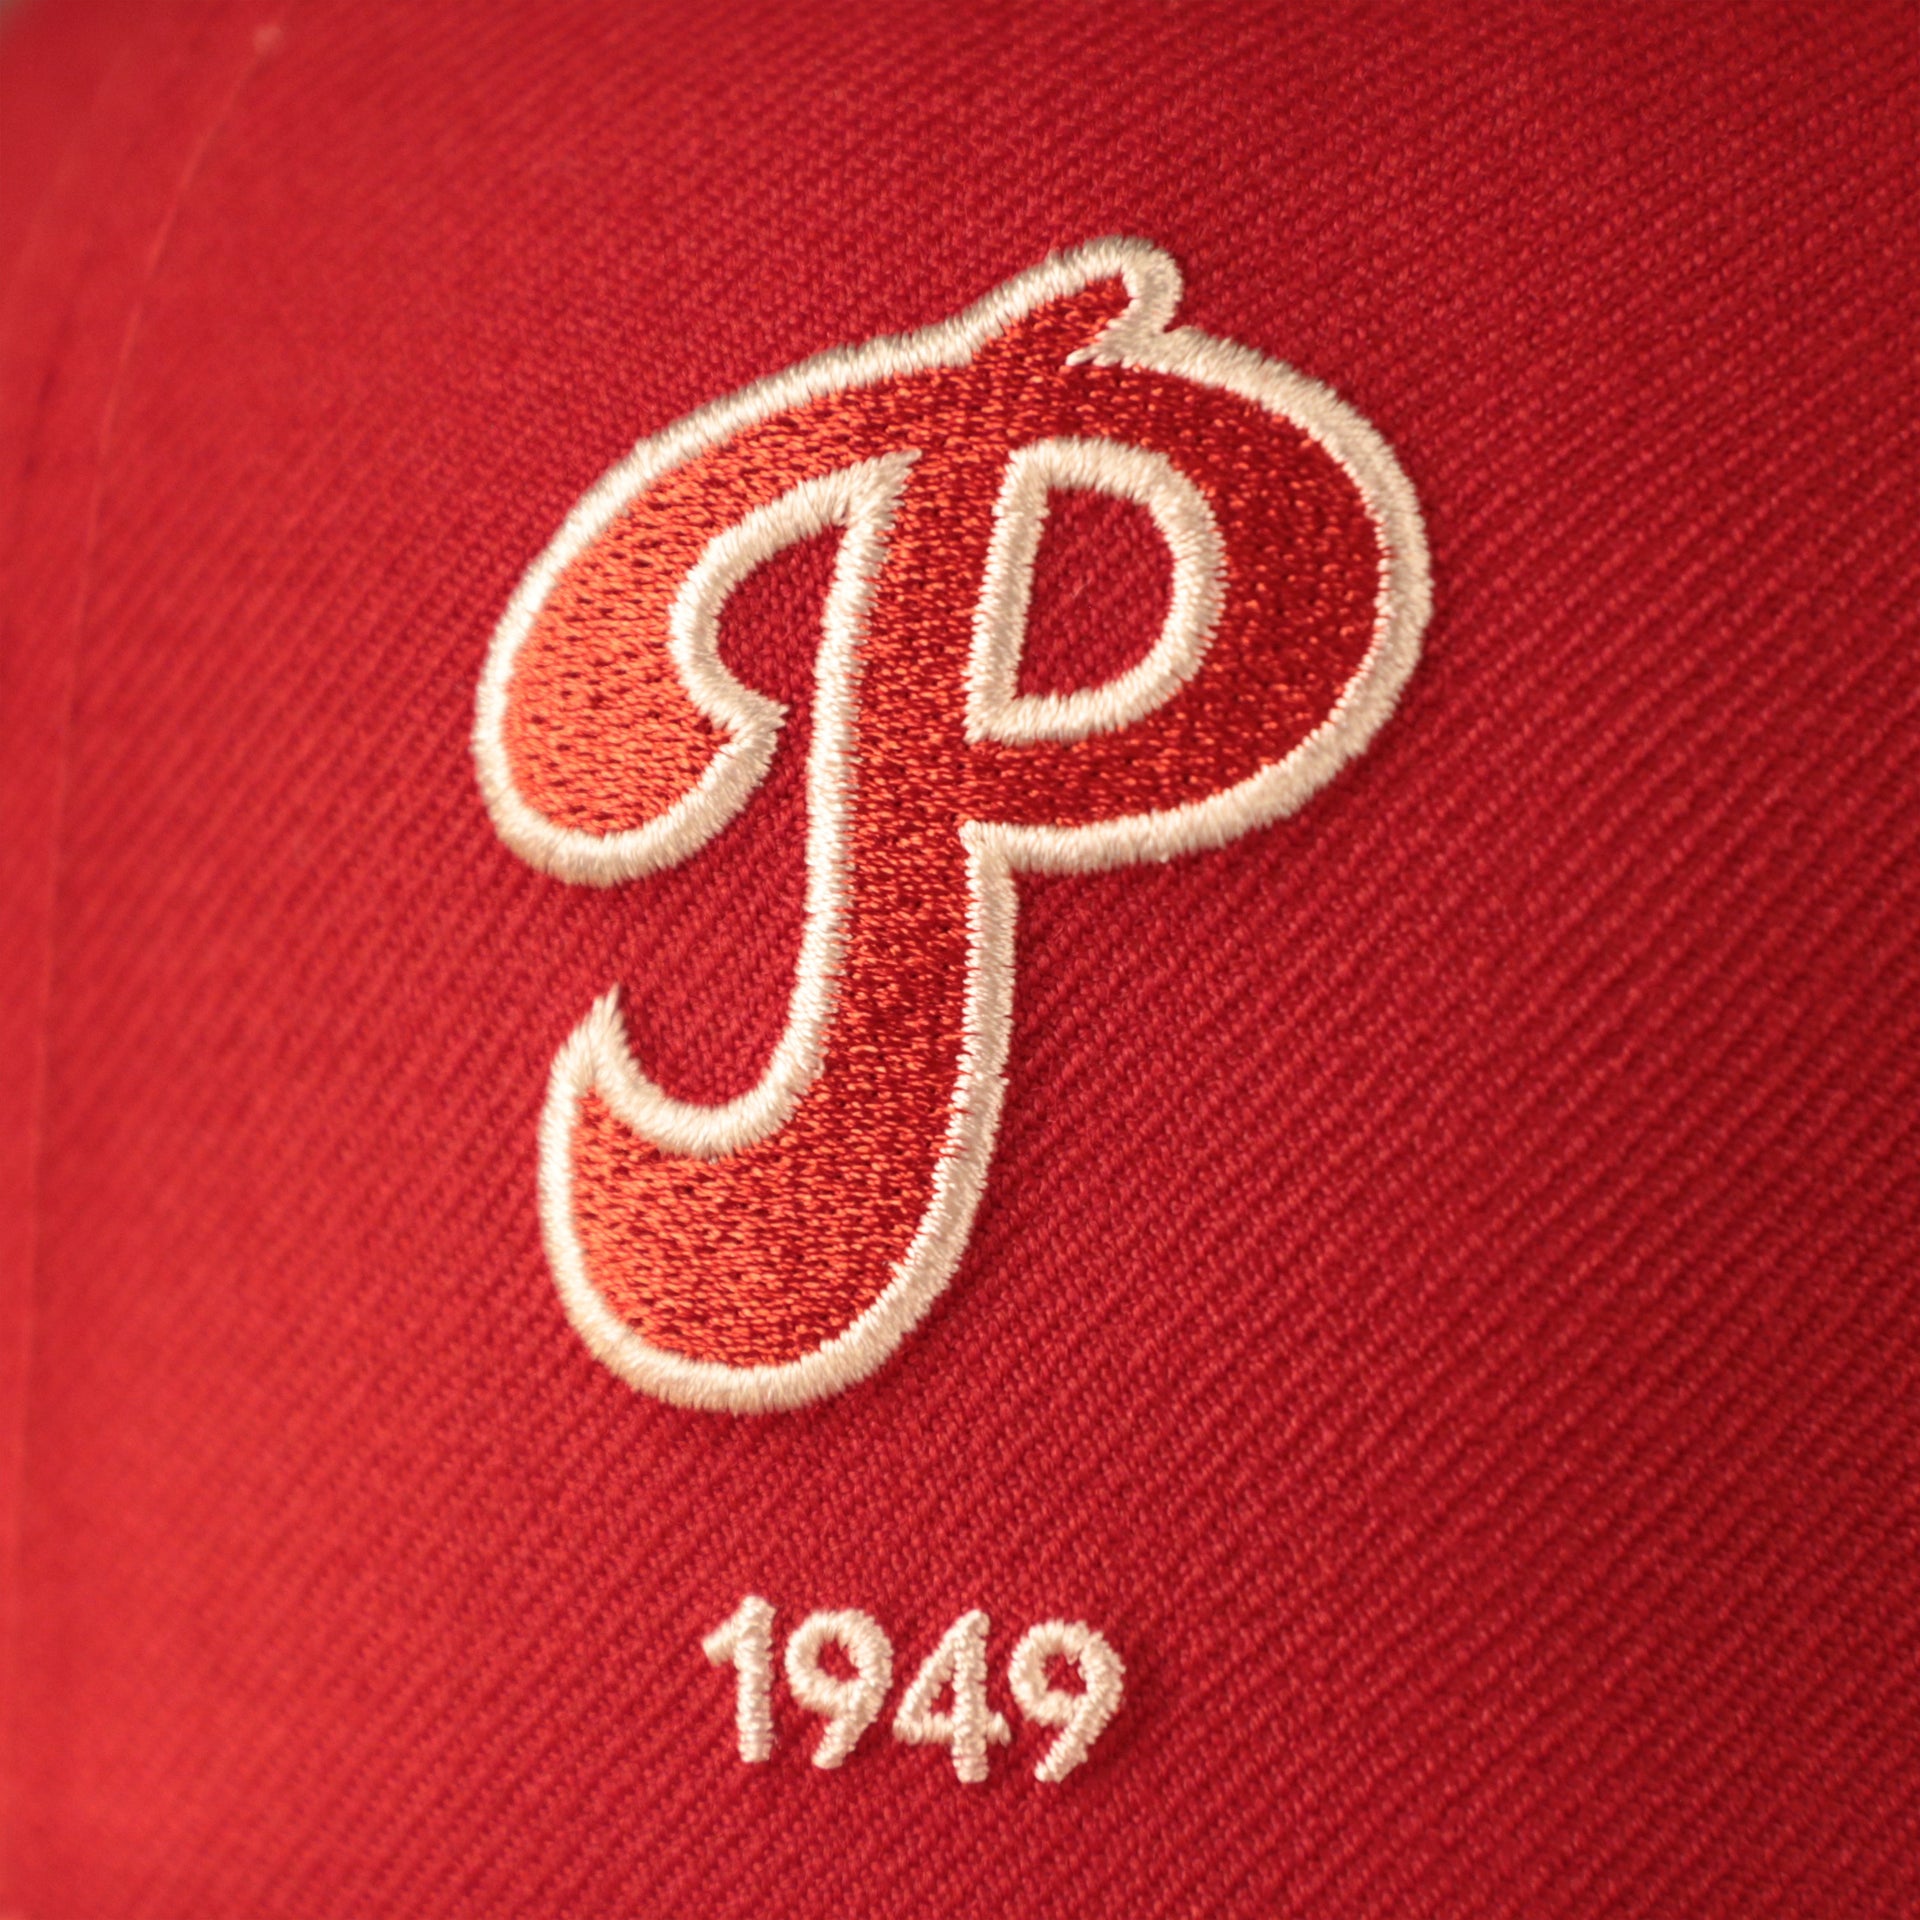 The red 1949 logo of the fighting Phils on the red patch fitted hat for the team by New Era.